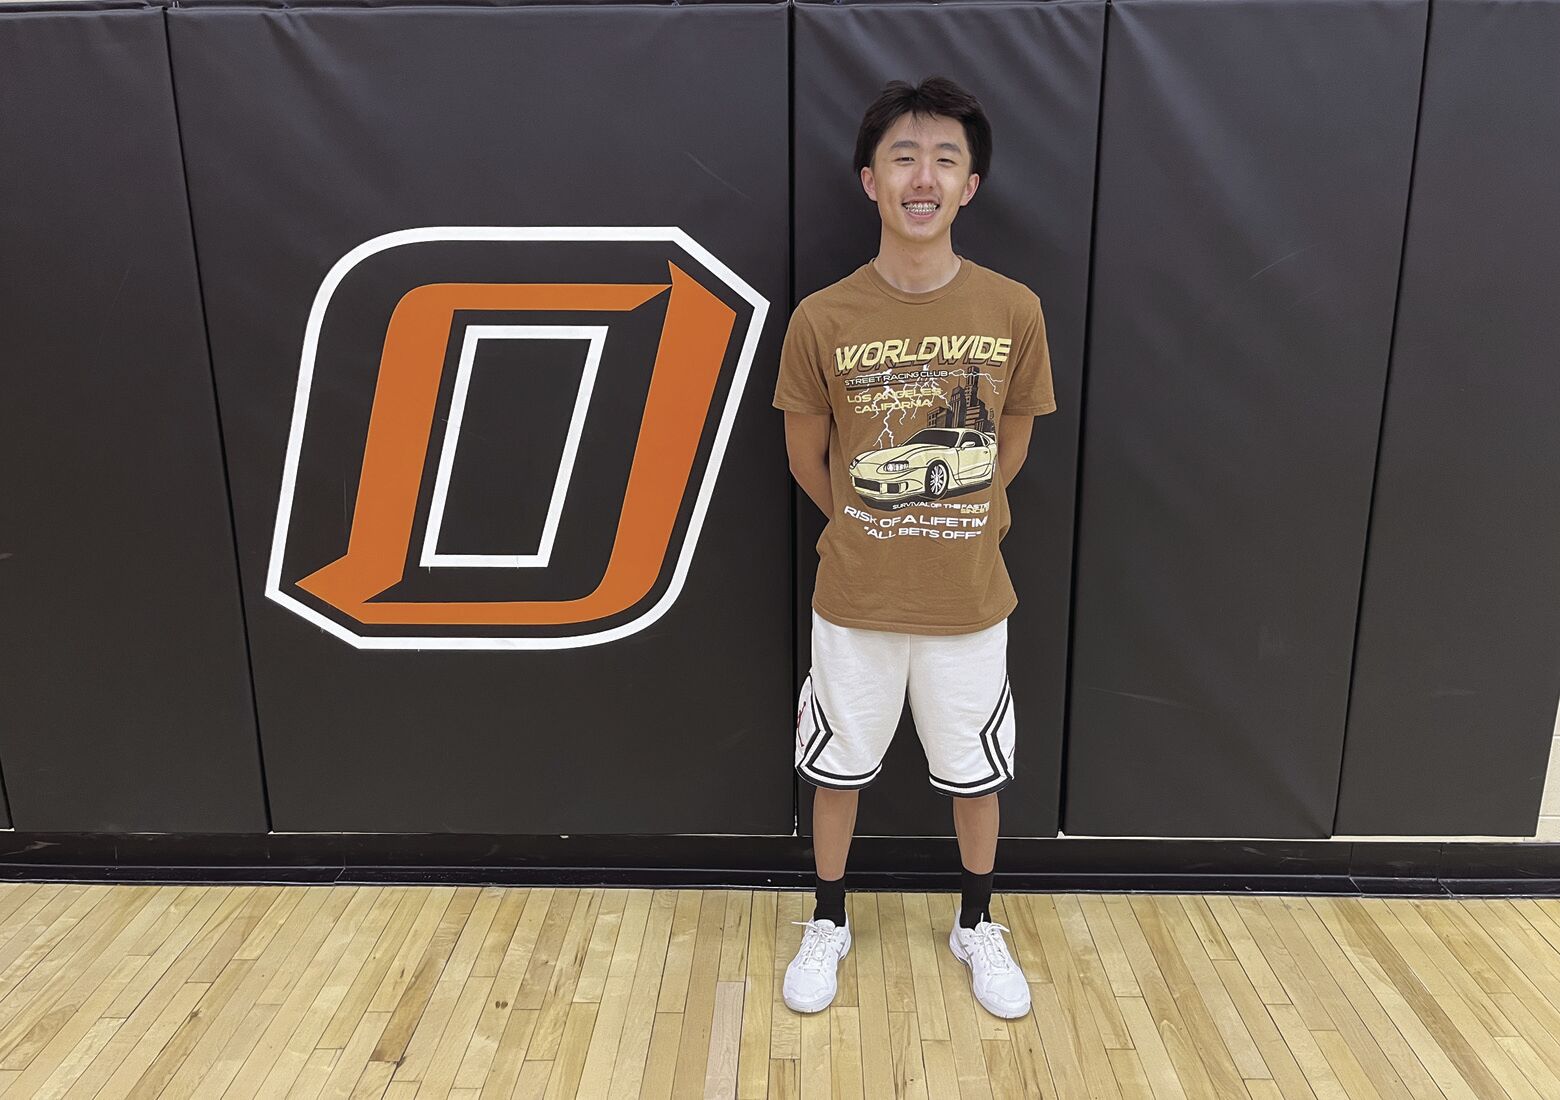 Failing upwards: Osseo boys’ volleyball preview